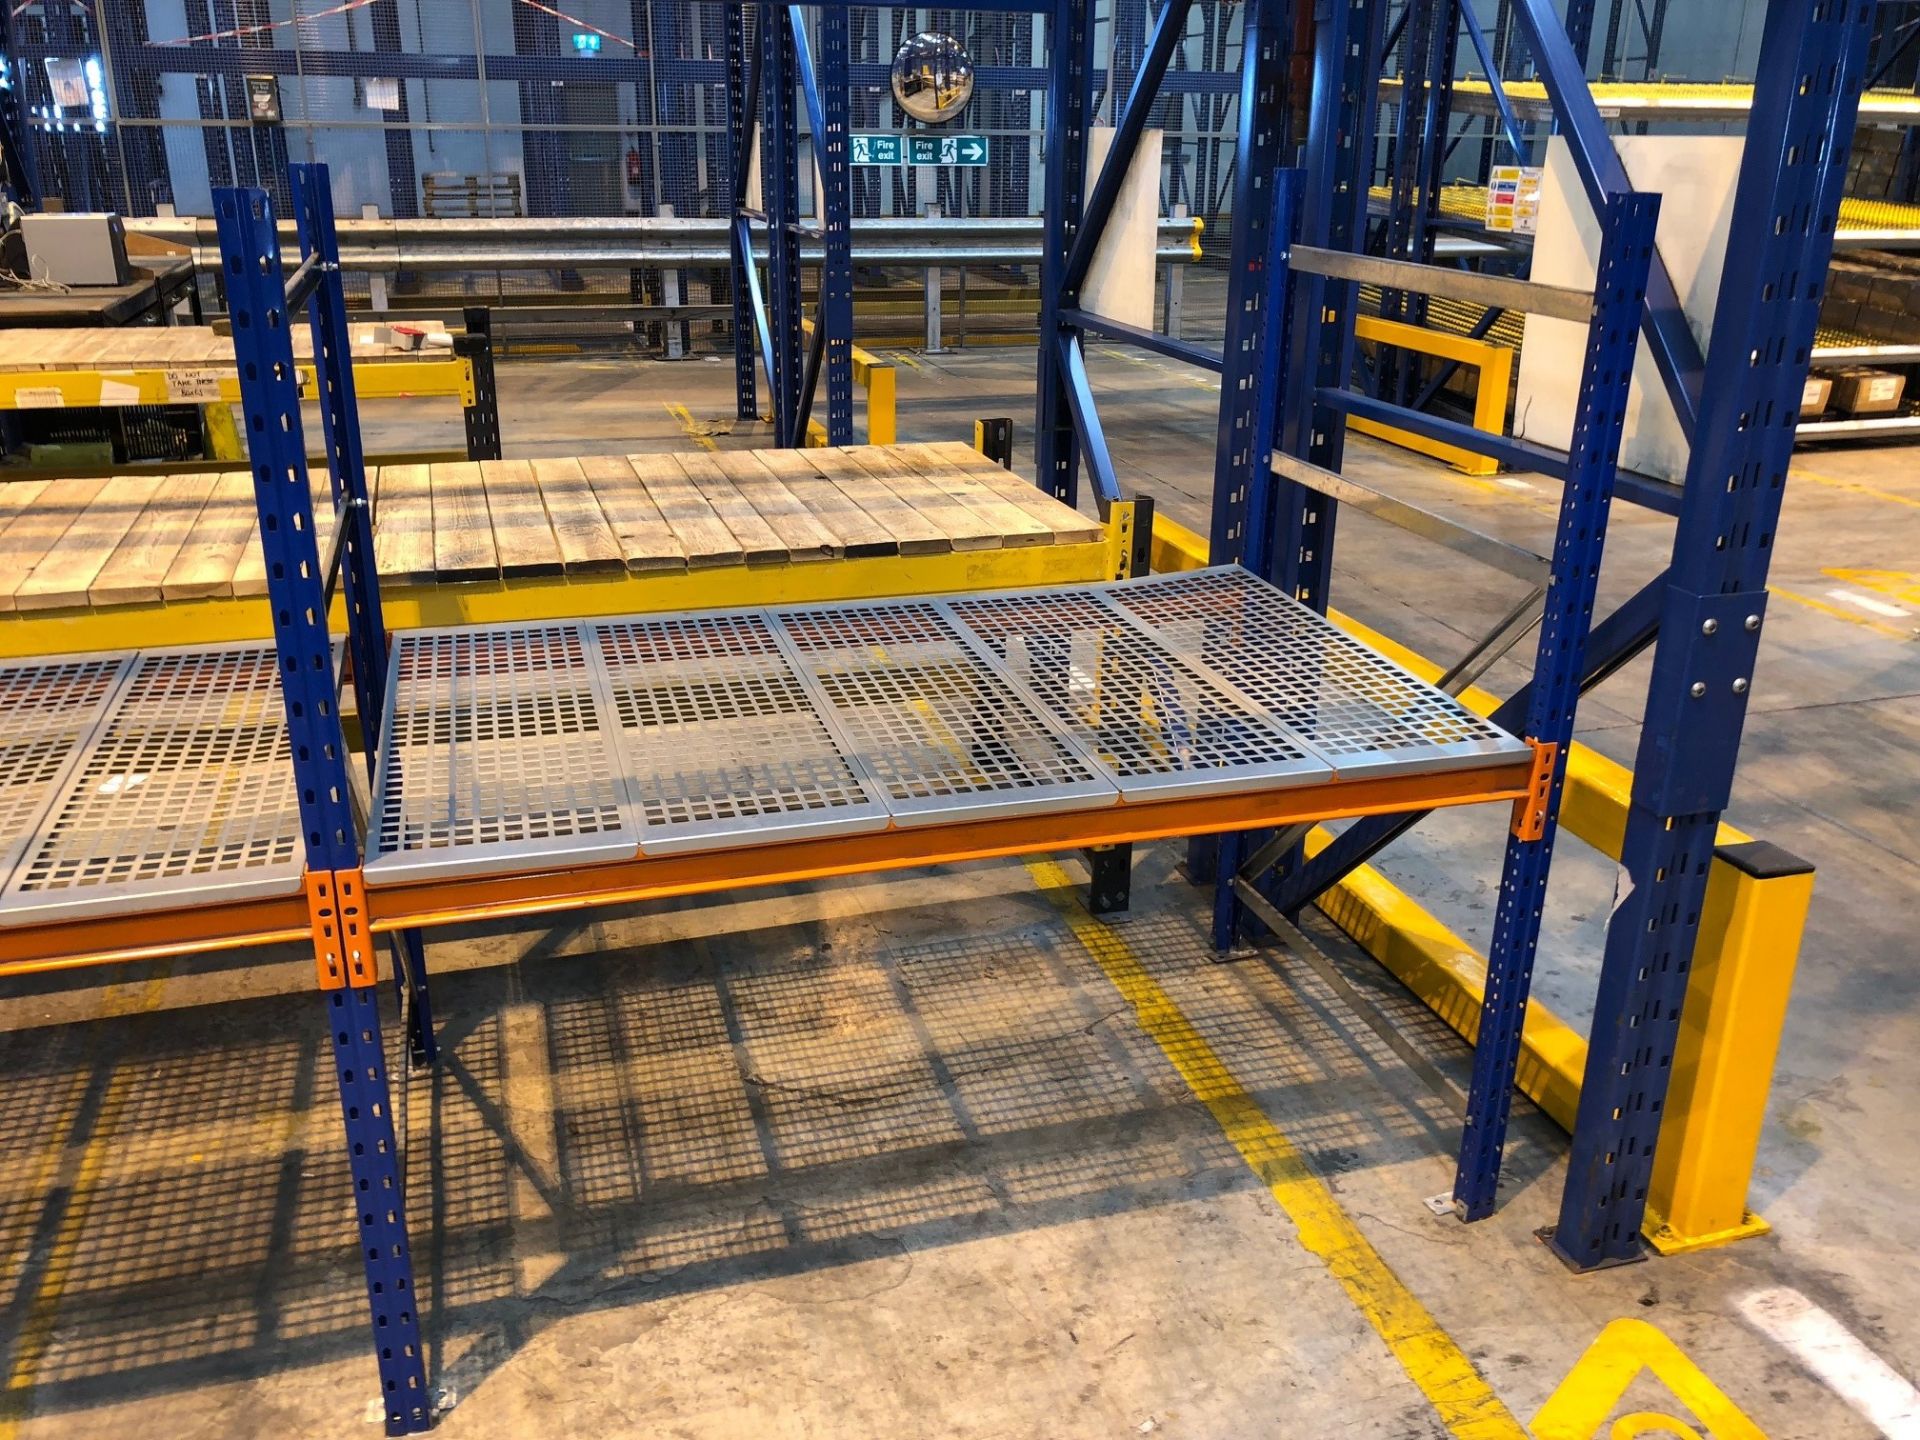 2 x Bays of Small Warehouse Racking/Shelving - Excellent Condition (L1500xH1500xD900mm - 3 x - Image 2 of 4